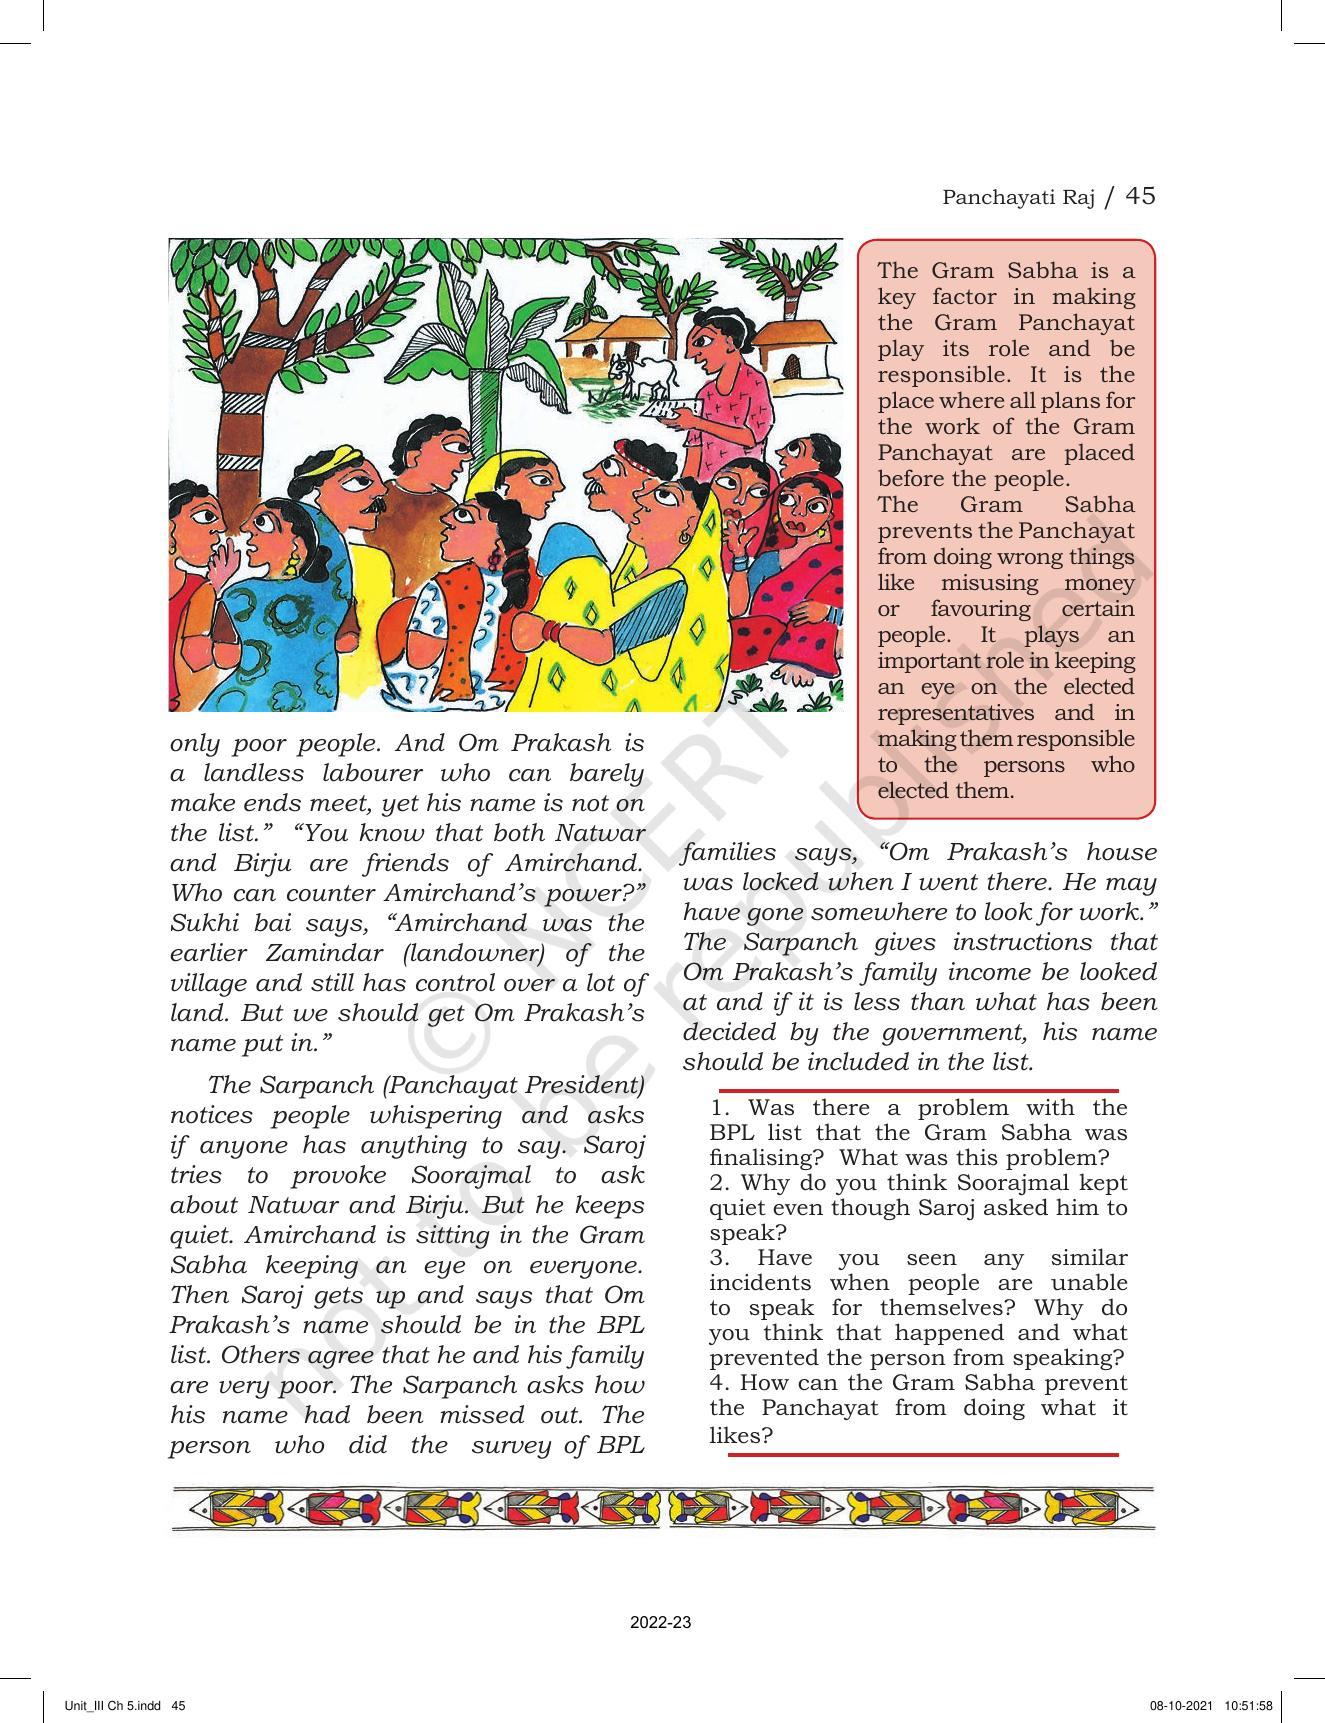 NCERT Book for Class 6 Social Science(Political Science) : Chapter 5-Panchayati Raj - Page 5